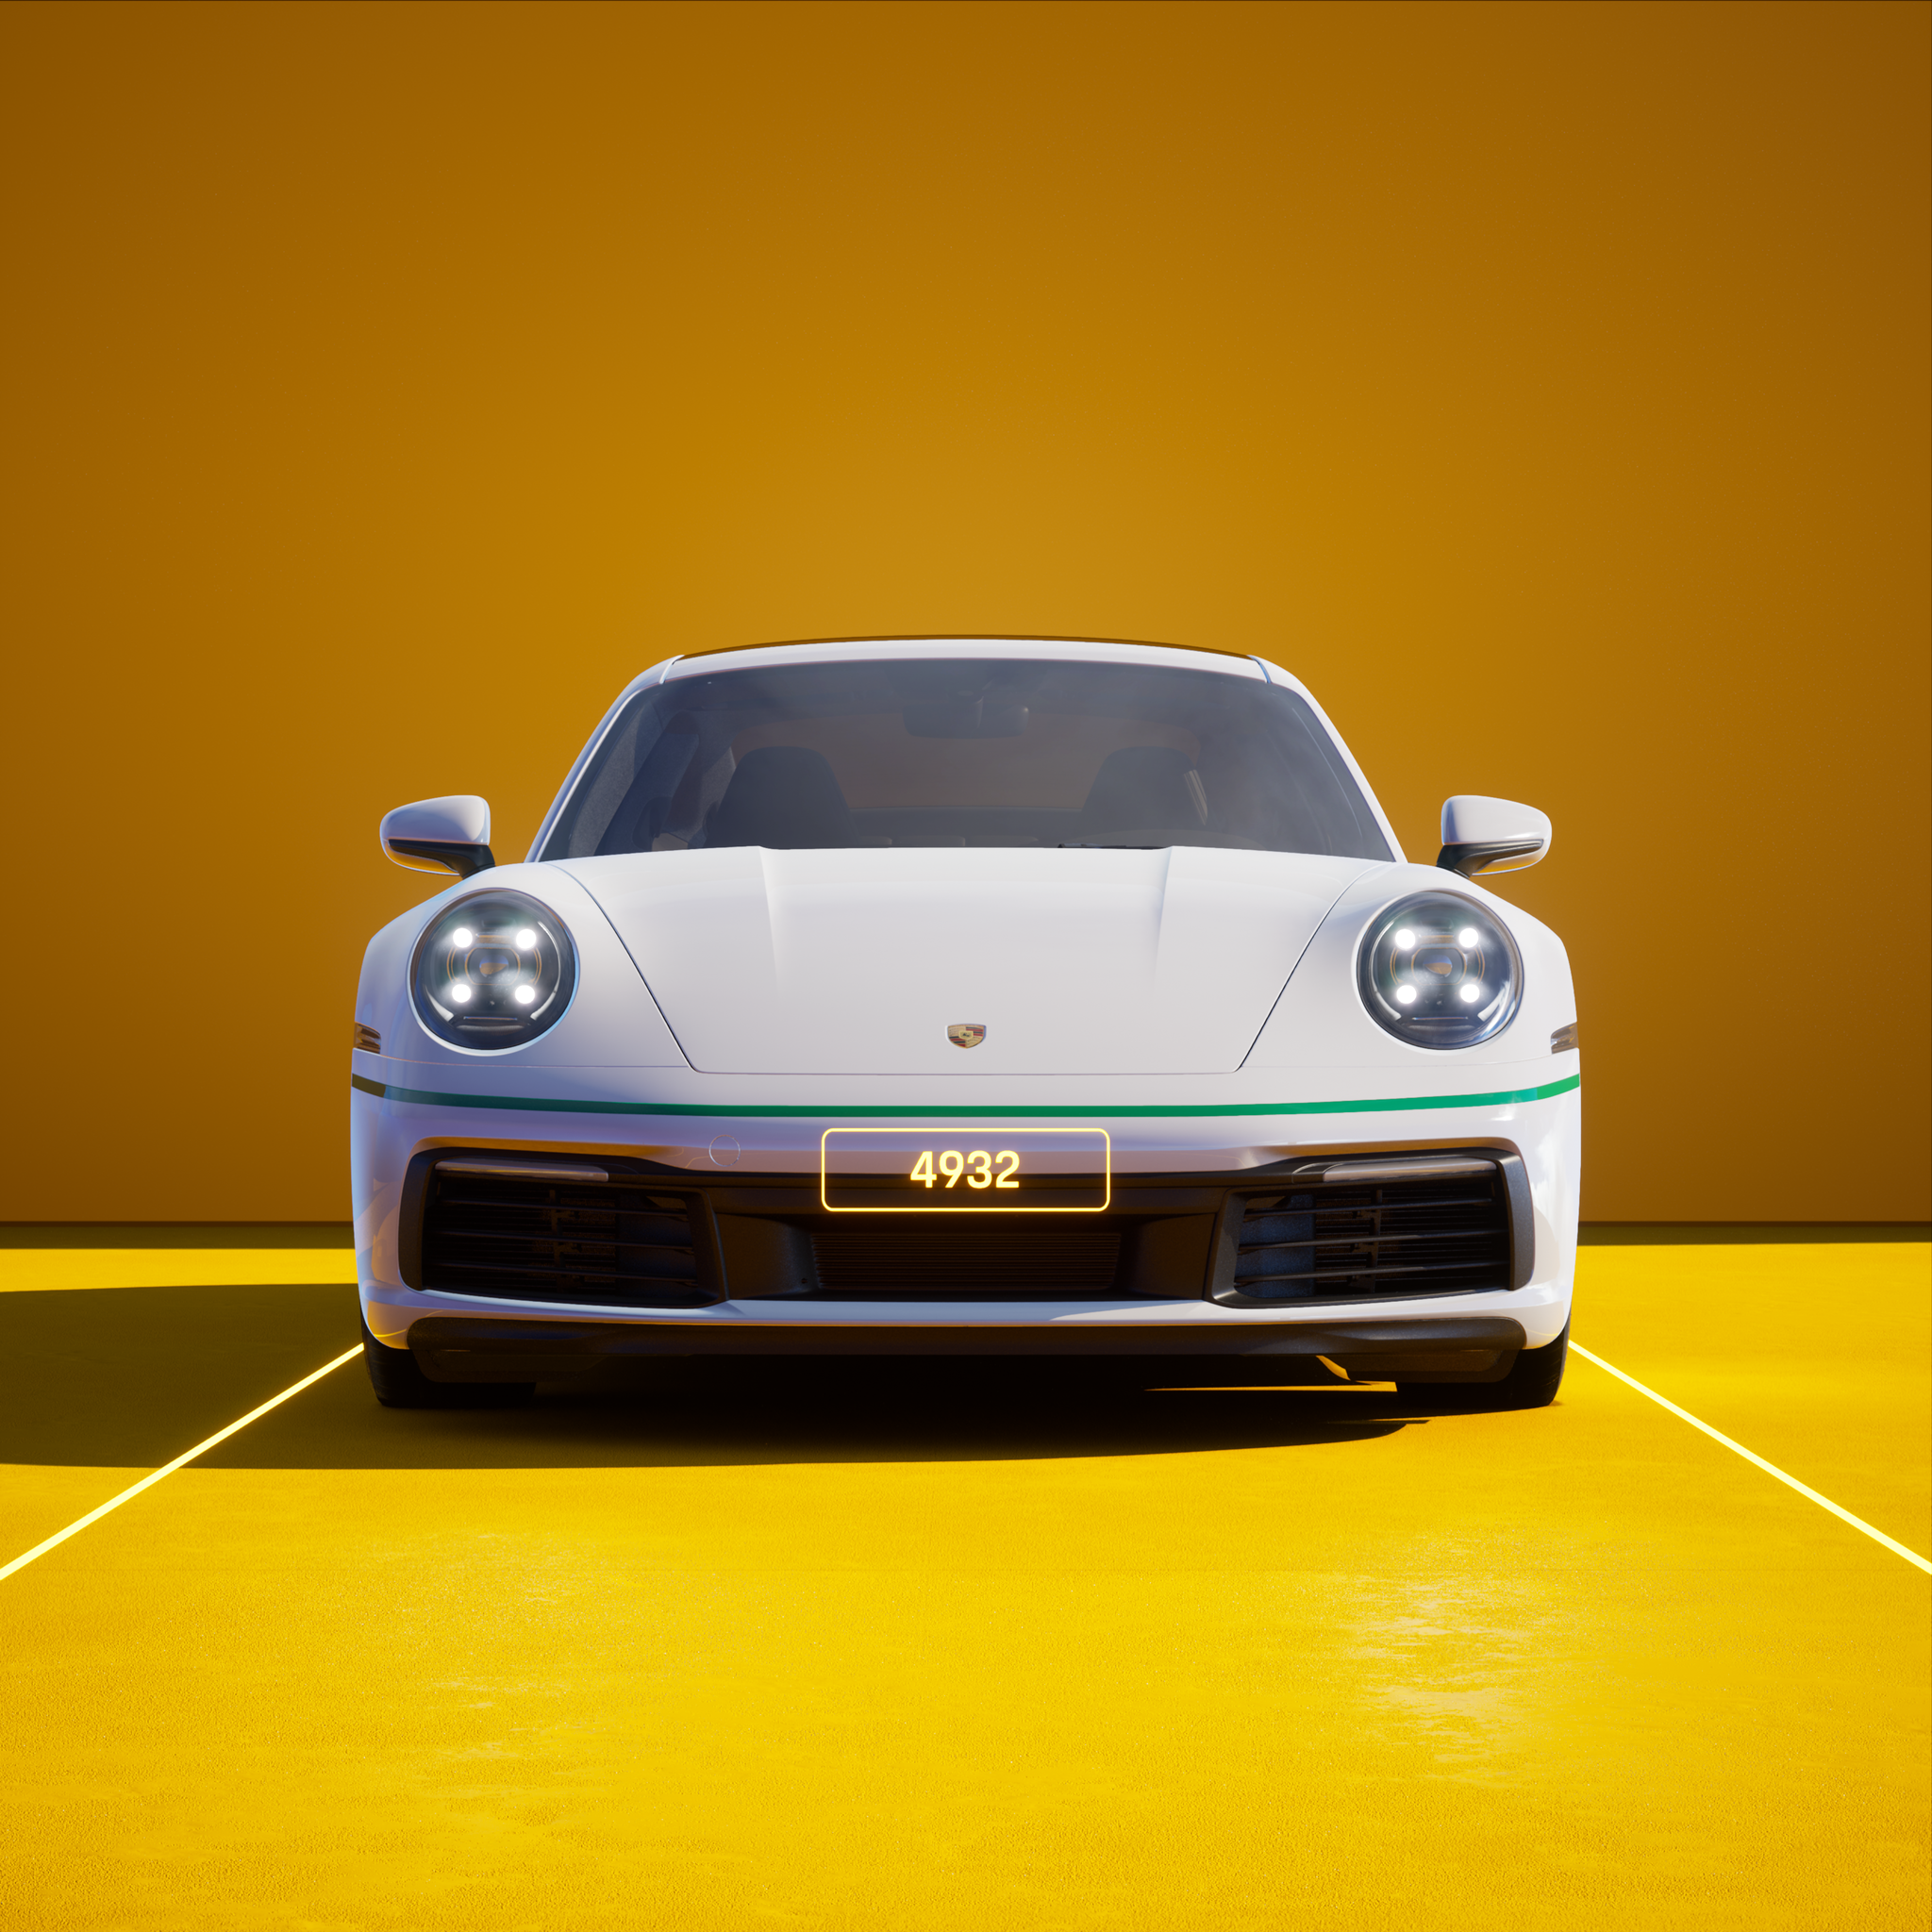 The PORSCHΞ 911 4932 image in phase